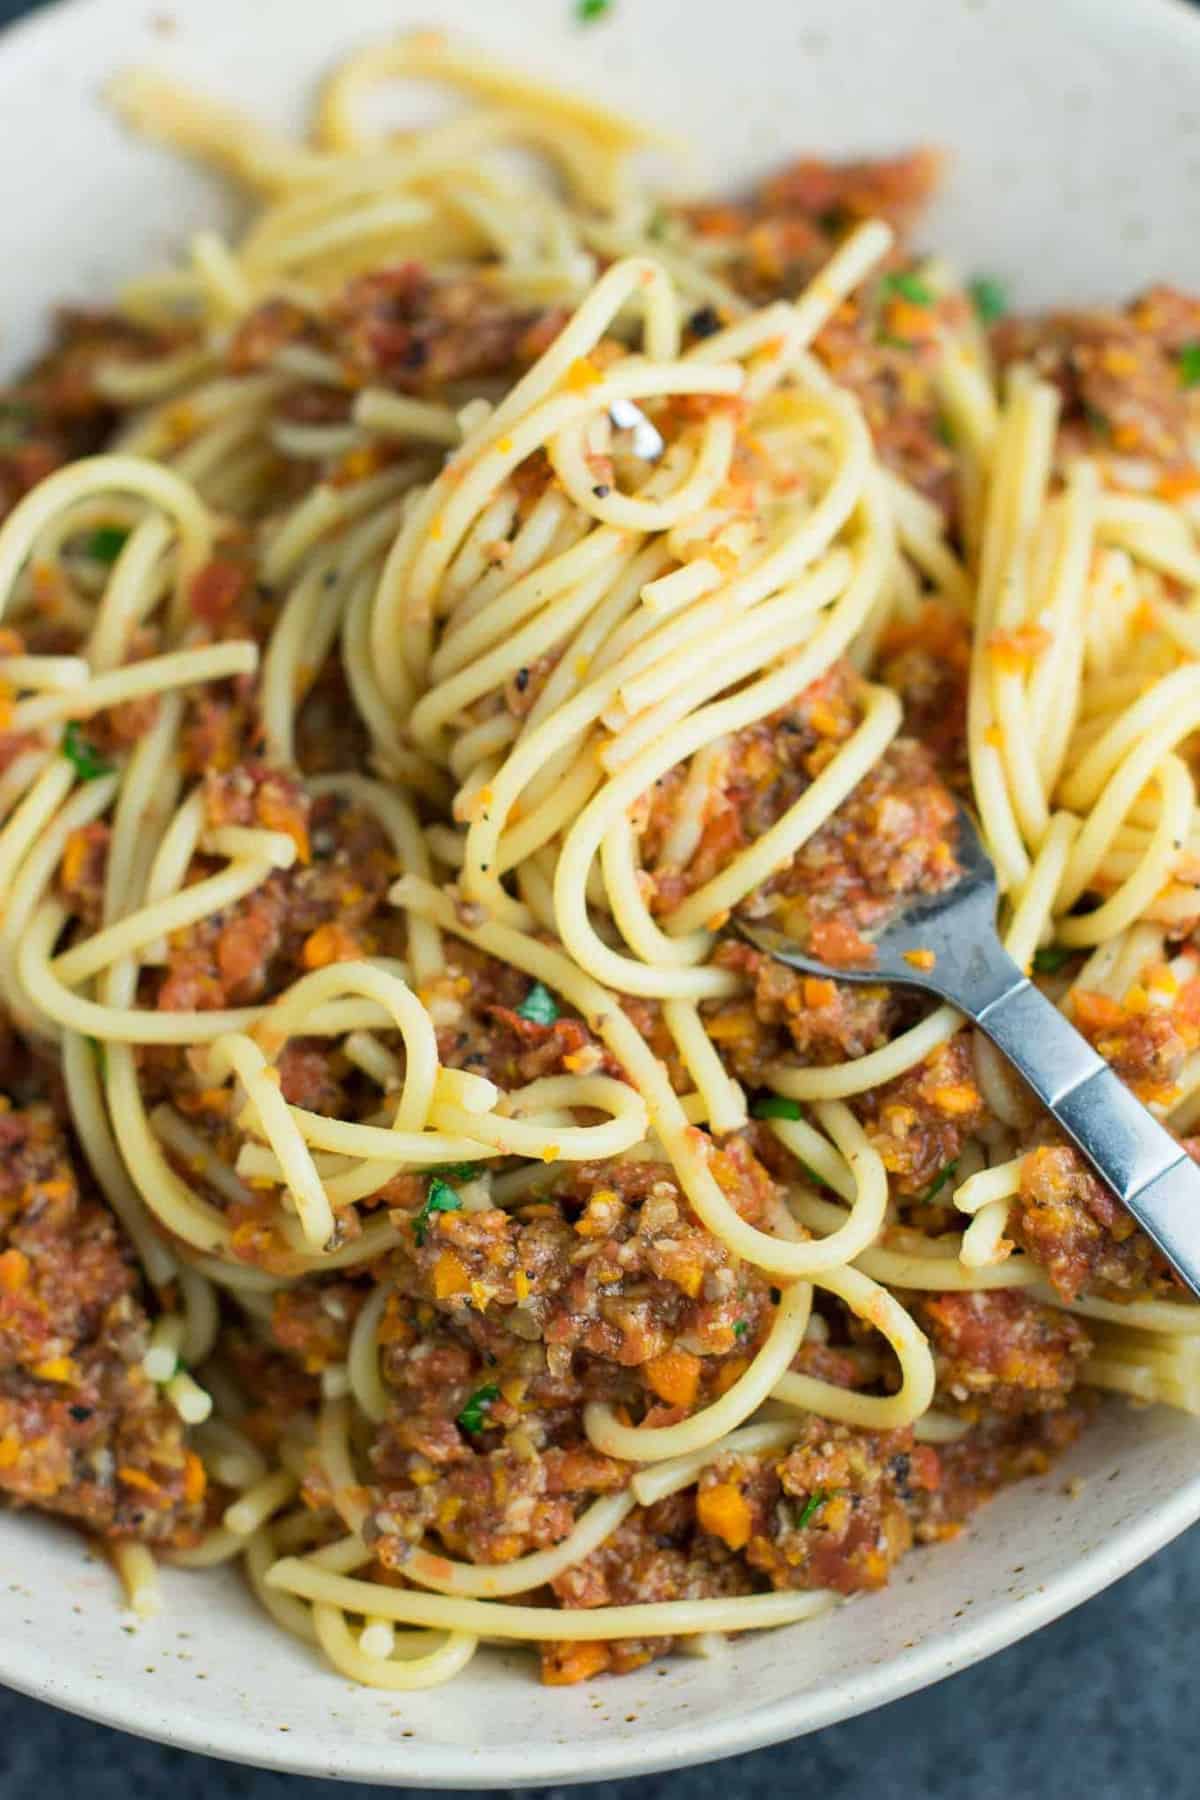 Vegetable bolognese recipe made with mushrooms, carrots, celery, garlic, and onion. A delicious meatless vegetarian "meat" sauce recipe. #vegetablebolognese #vegan #vegetarian #bologneserecipe